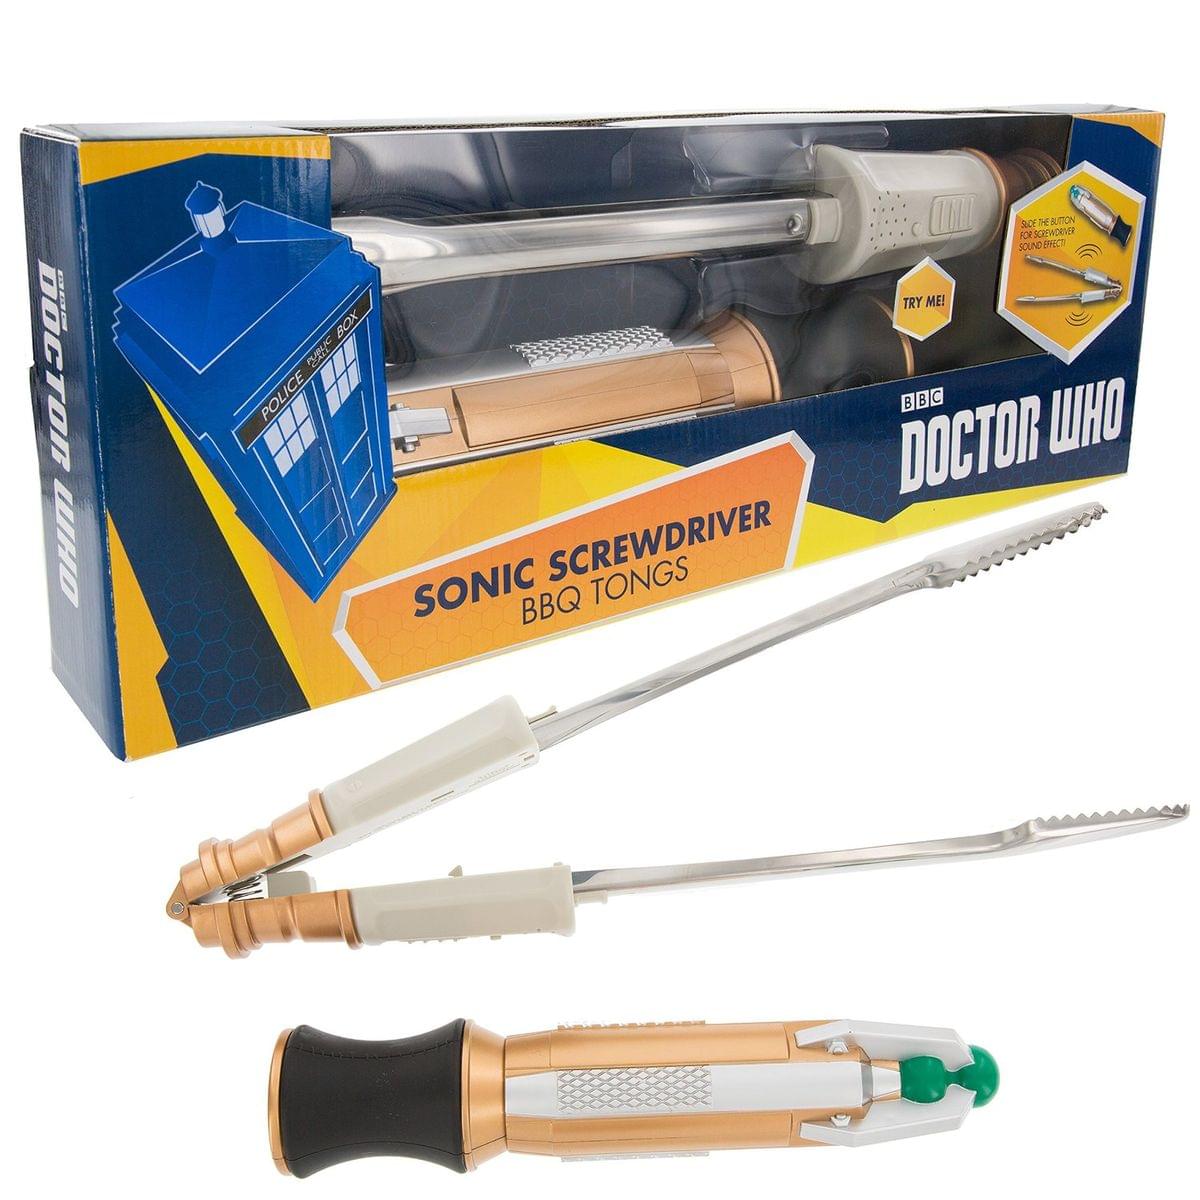 Doctor Who Sonic Screwdriver BBQ Tongs